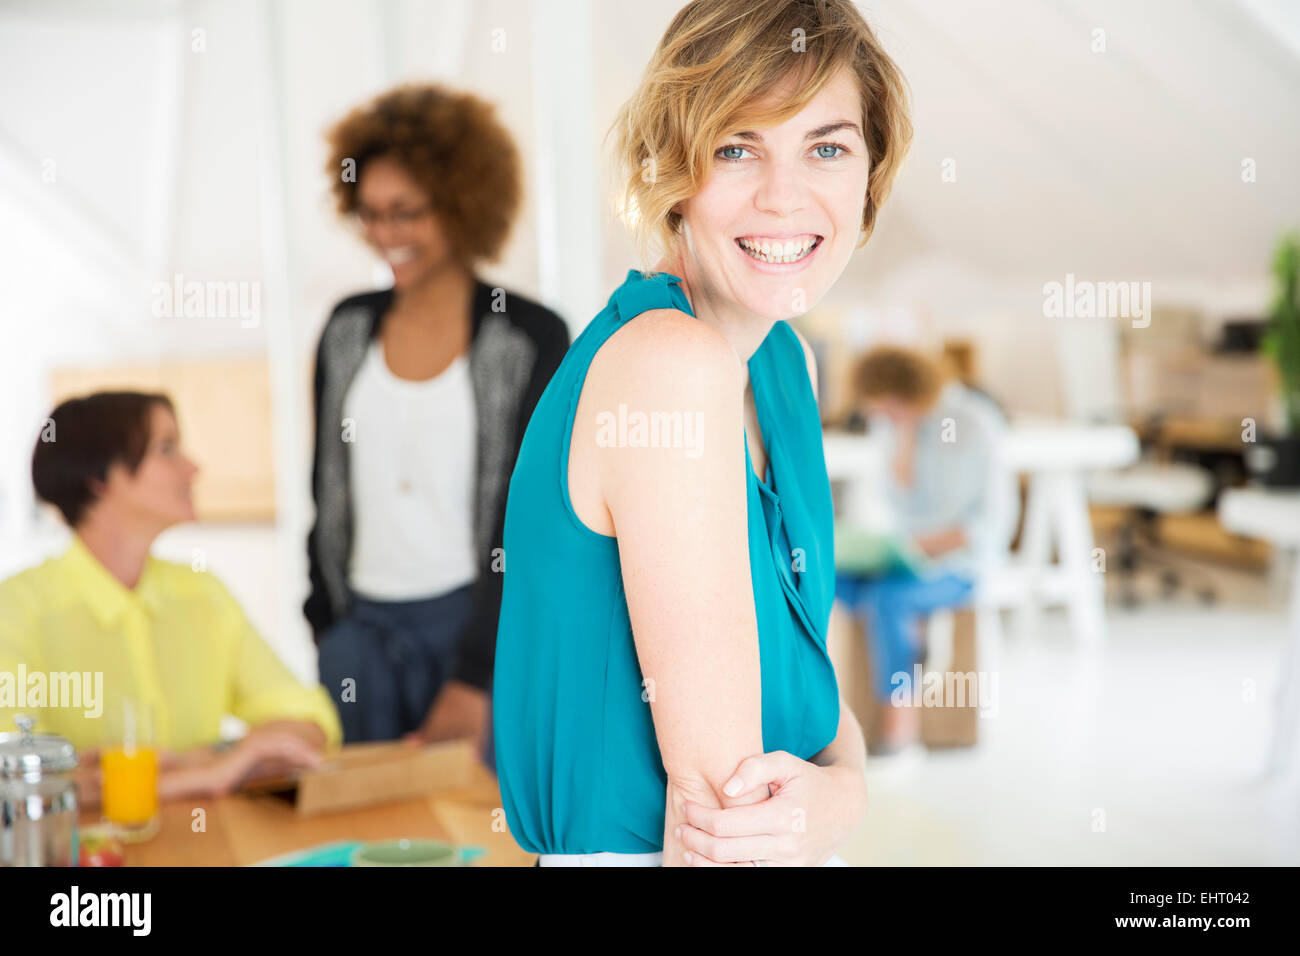 Portrait of young woman smiling at office Banque D'Images